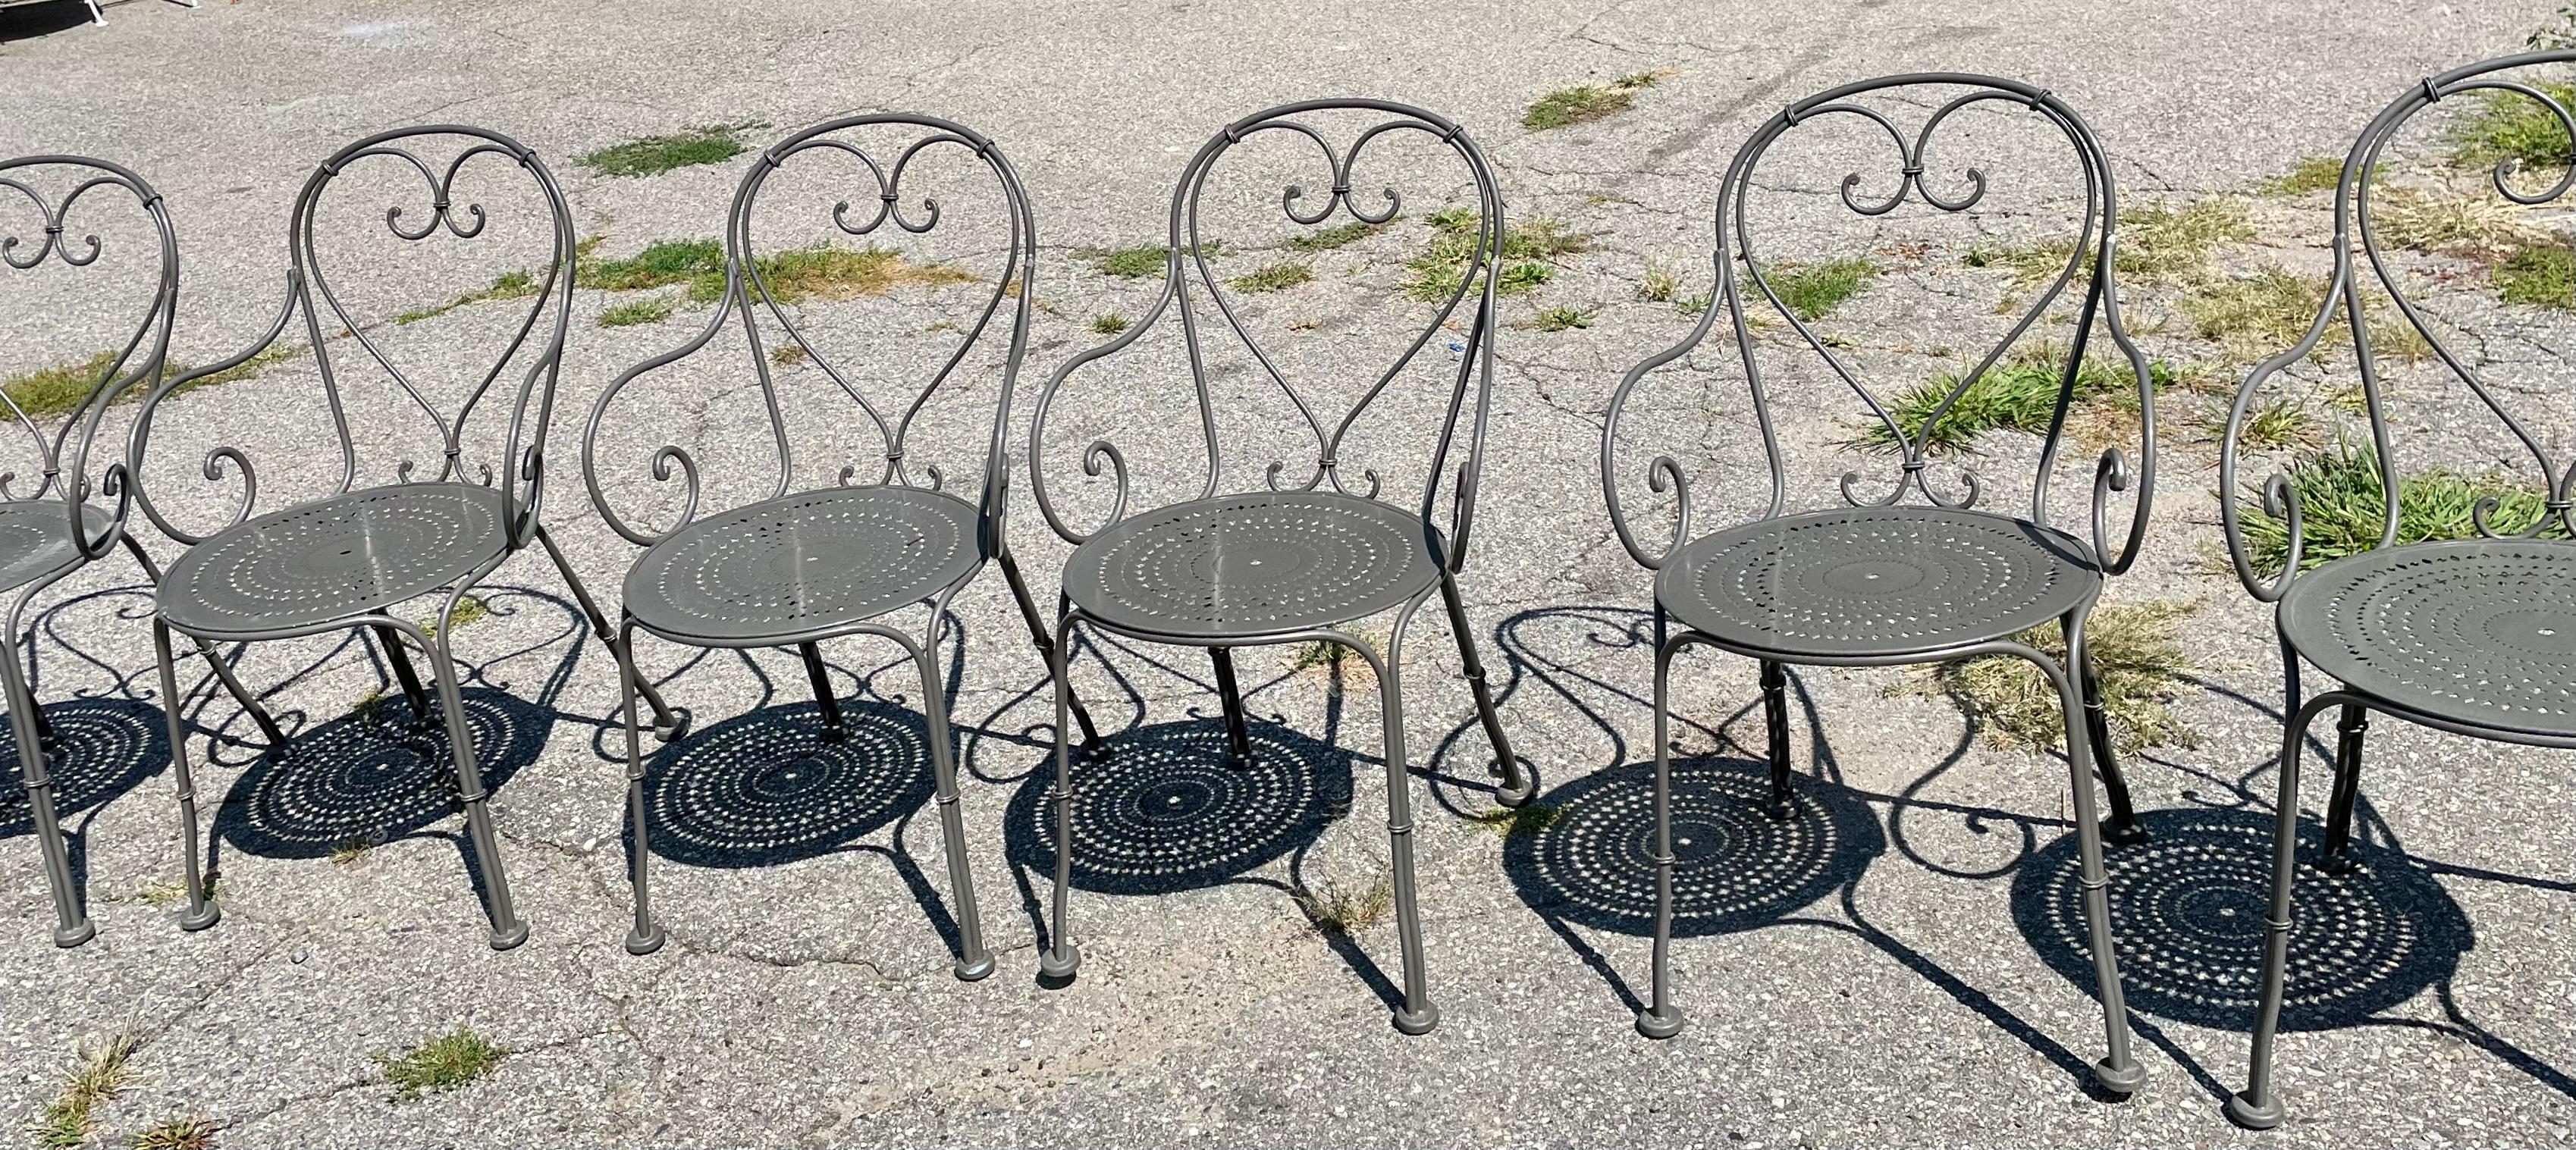 Woodard Chairs A Set of 10

French Cafe Chairs made out of heavy duty wrought iron are available now and ready to ship for your immediate enjoyment. These chairs feature a Heart Shaped back with scrolling arms and a generous seat diameter. Filagree